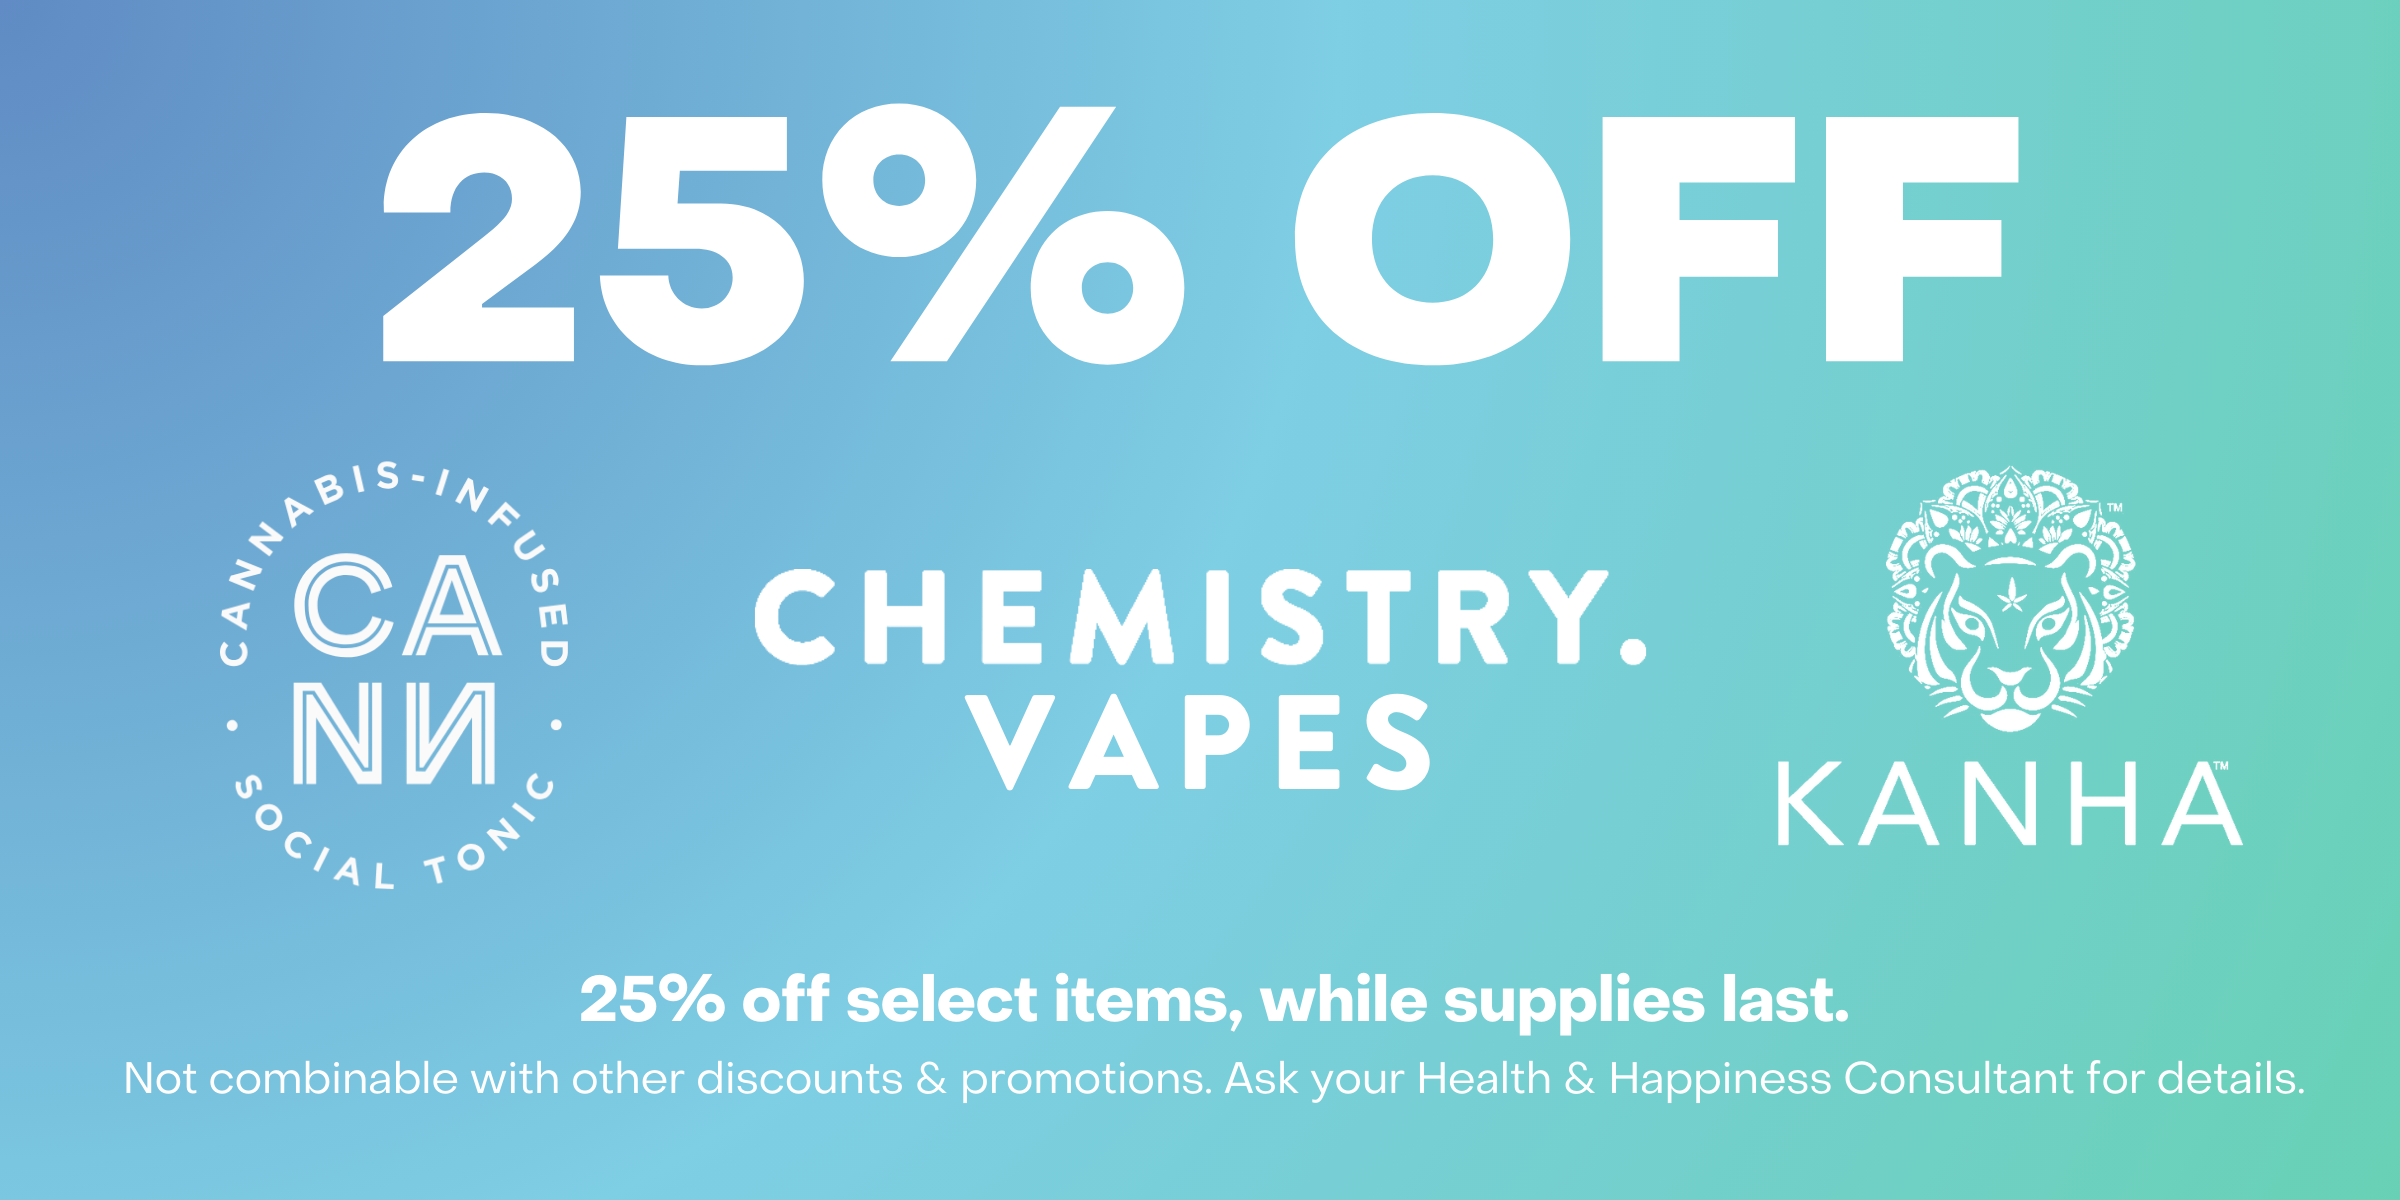 25% off CANN, Chemistry Vapes, Kanha. 25% off select items, while supplies last. Not combinable with other discounts and promotions. Ask your Health and Happiness consultant for details.